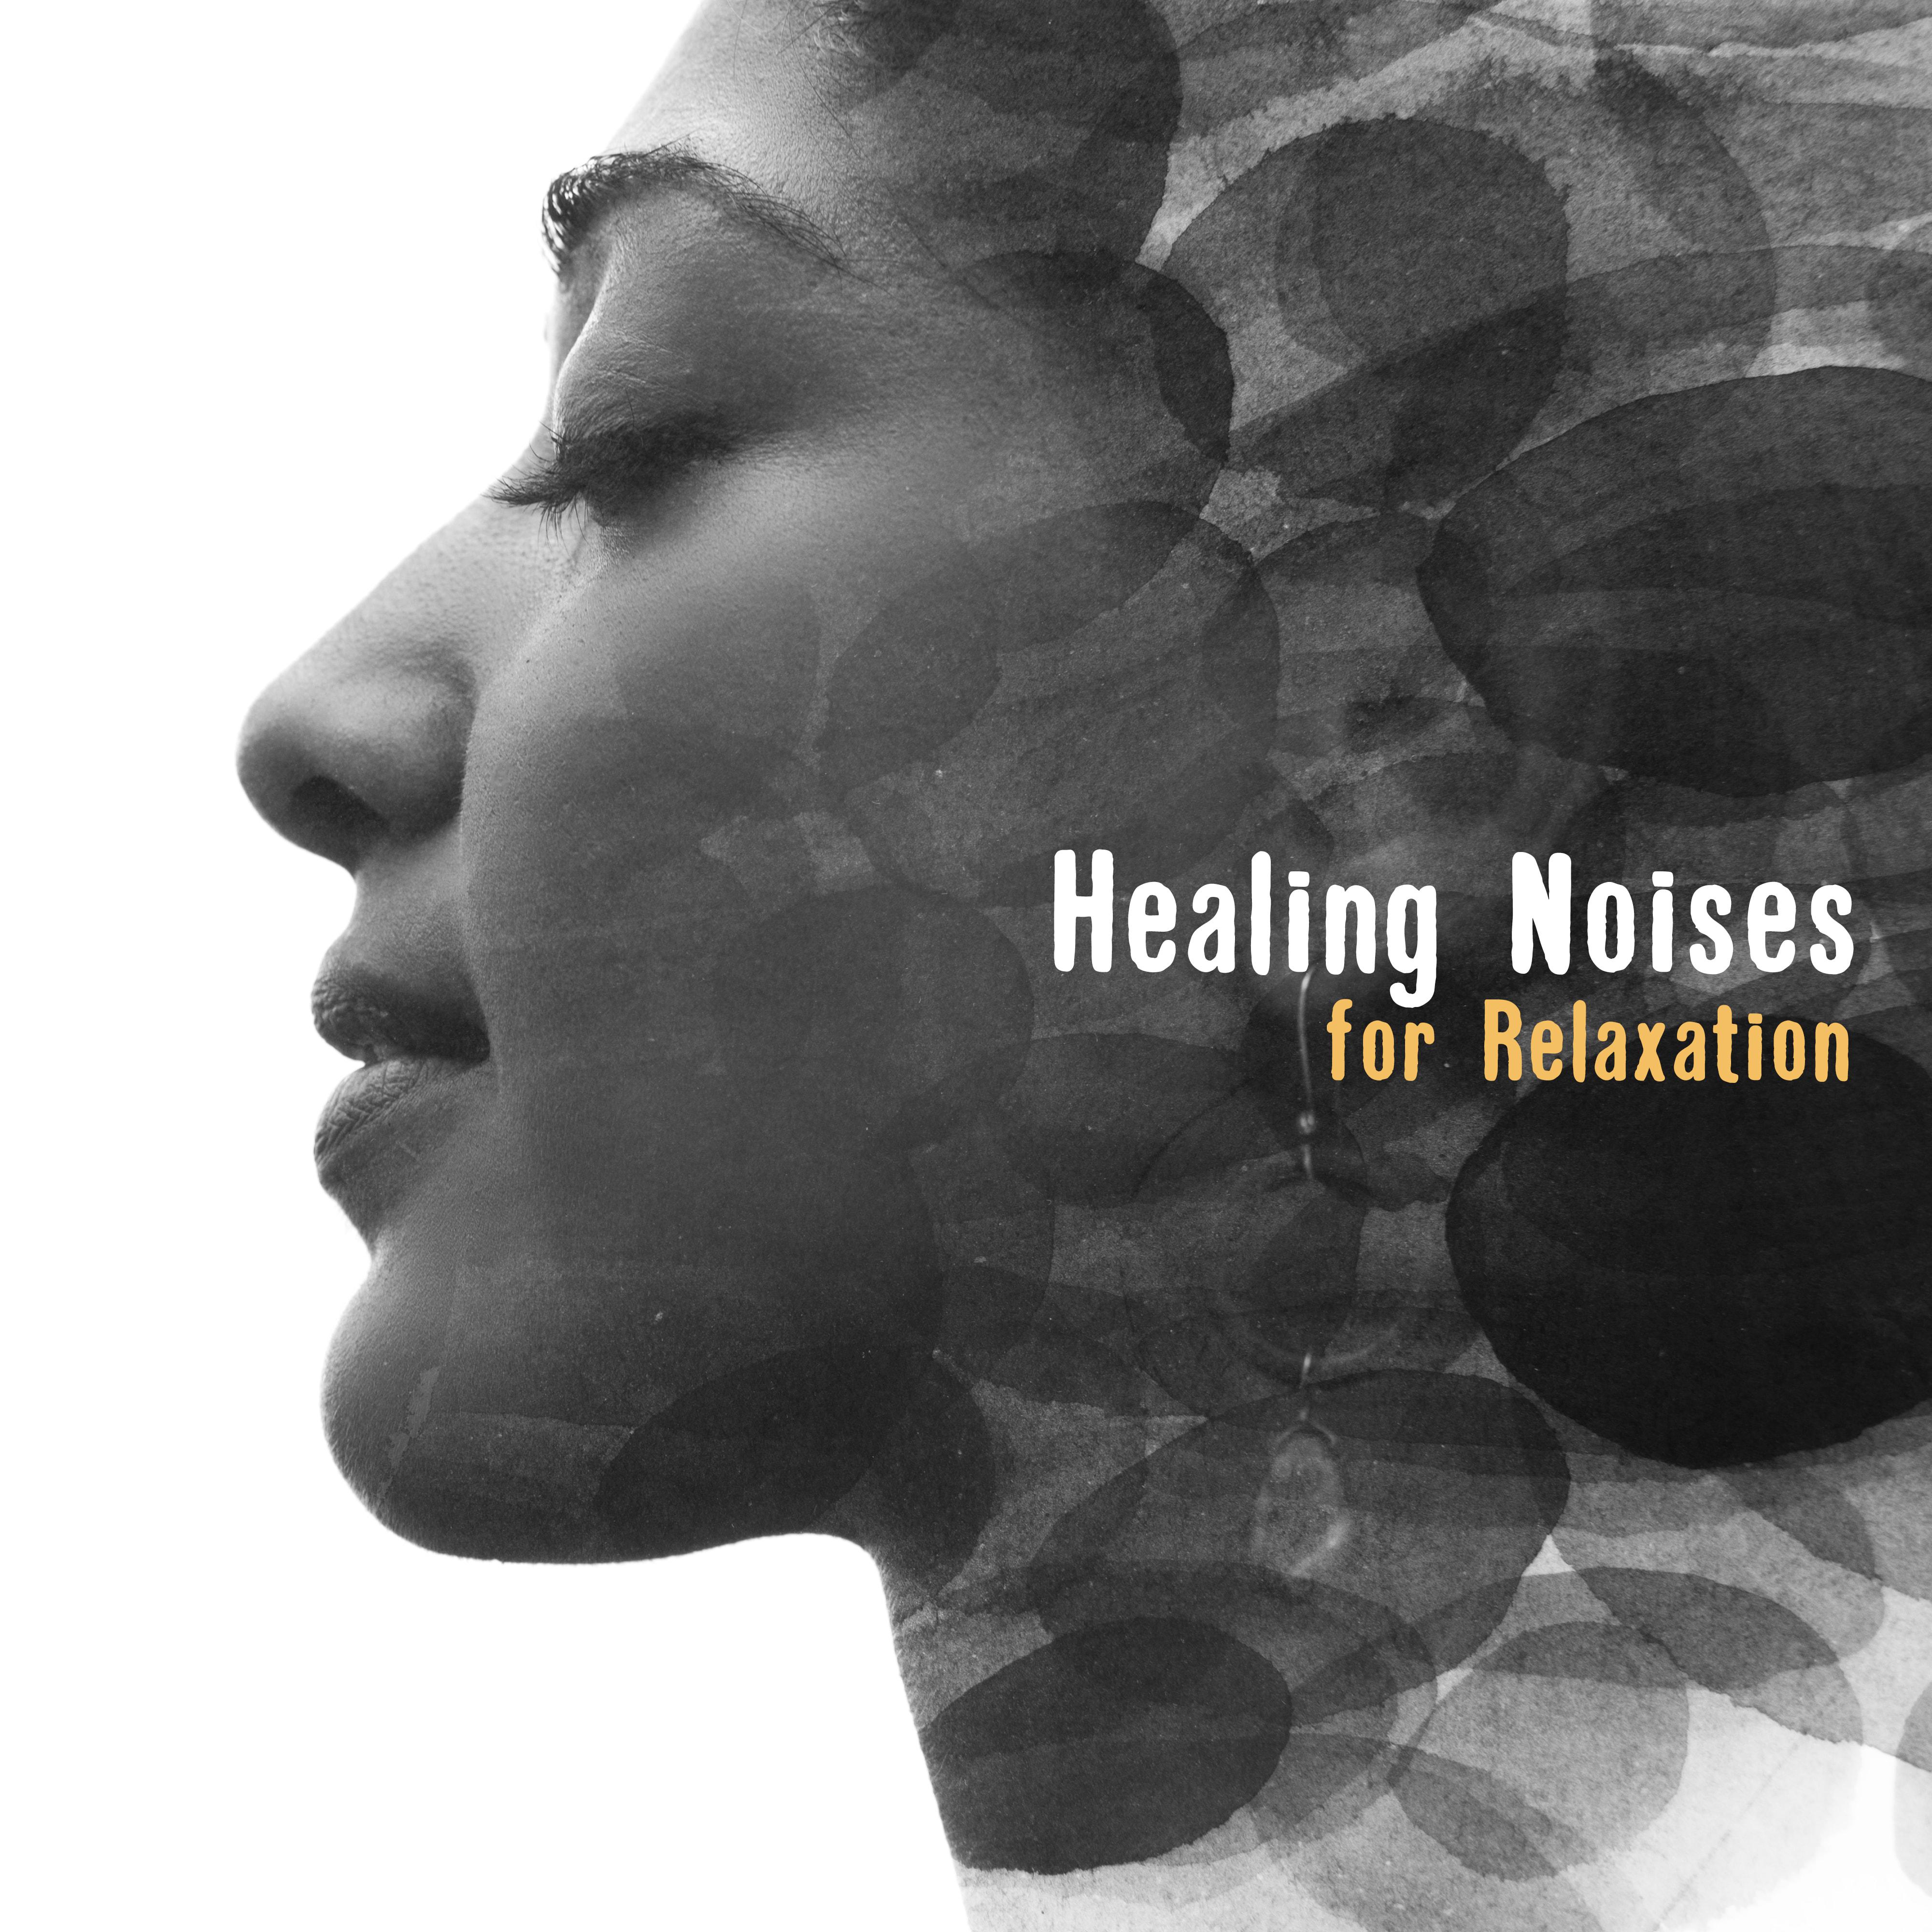 Healing Noises for Relaxation